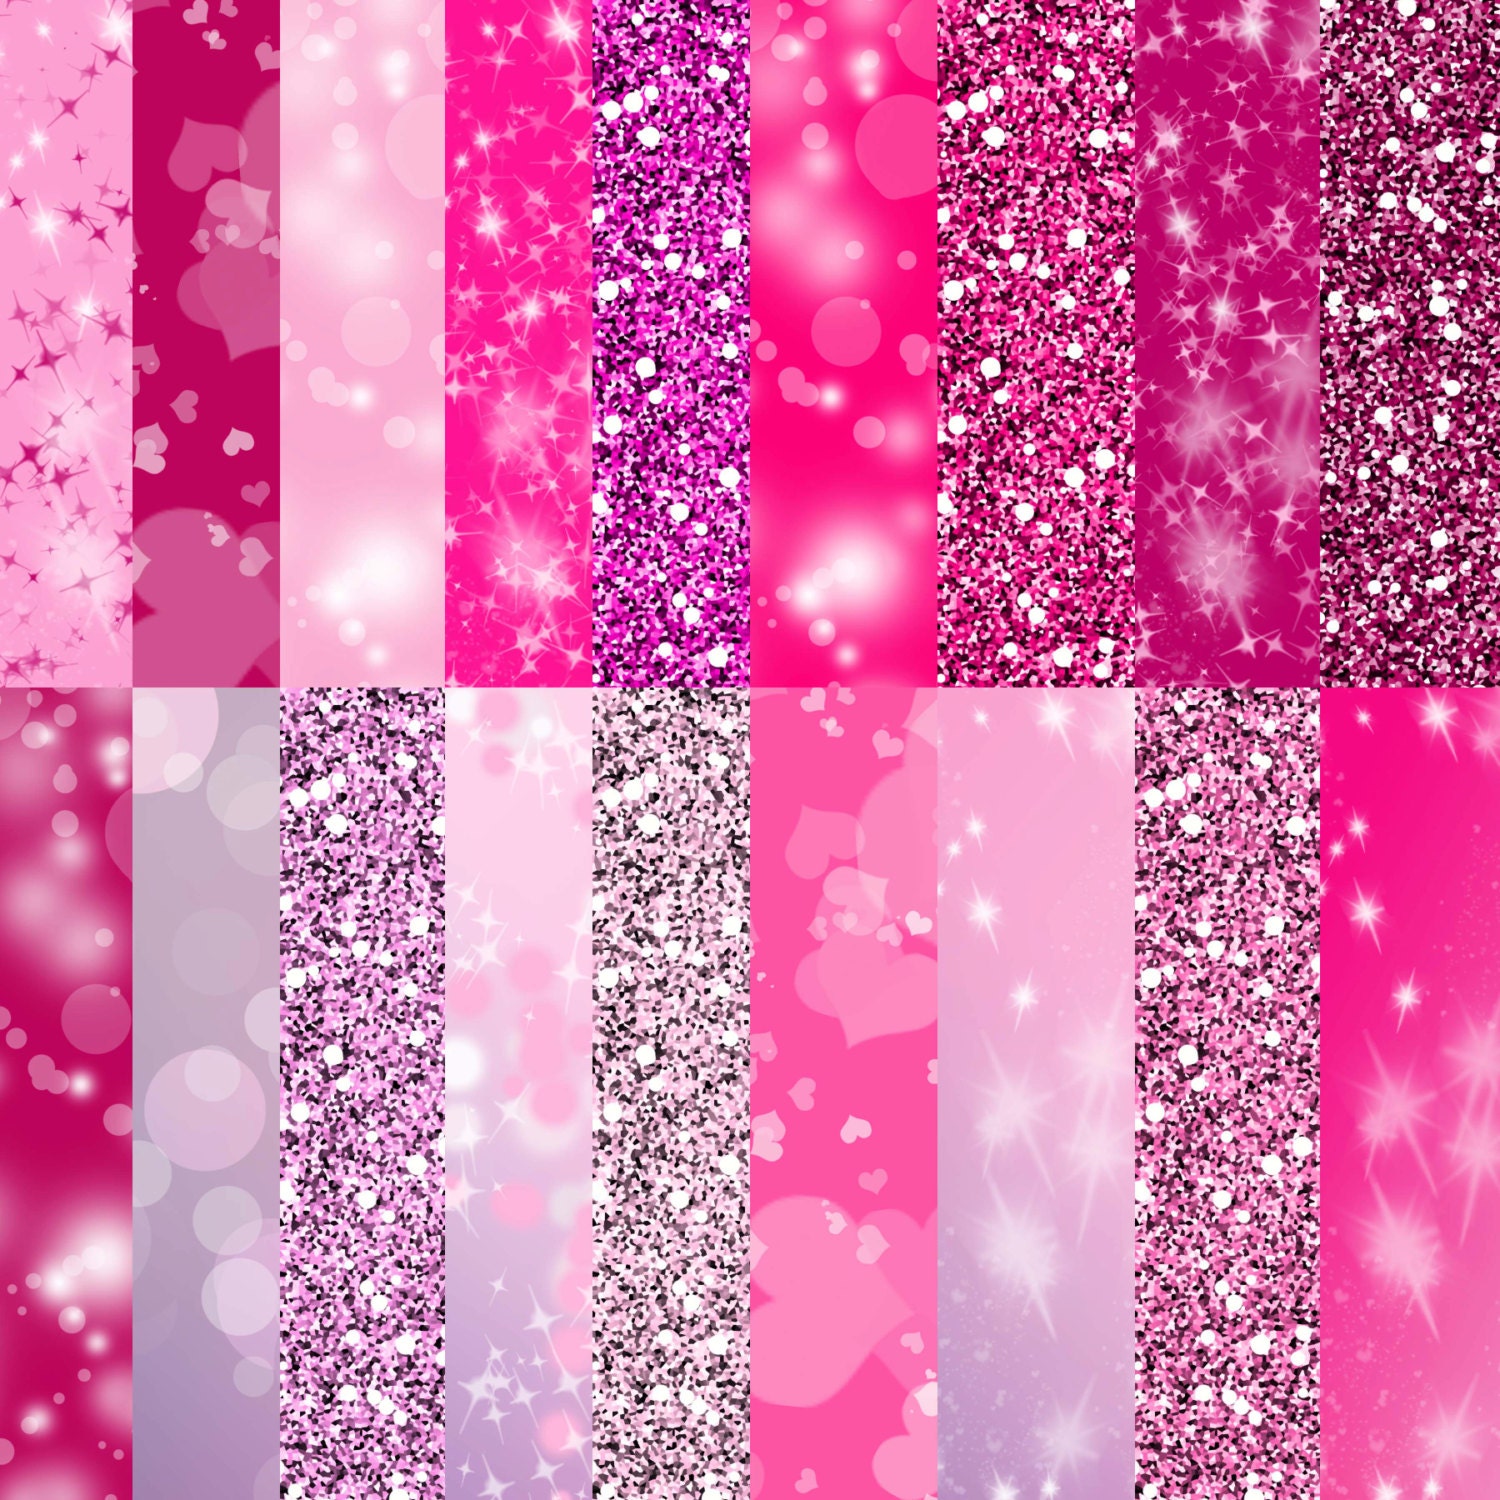 Download Pink glitter paper Digital paper in cute pink colors sparkle